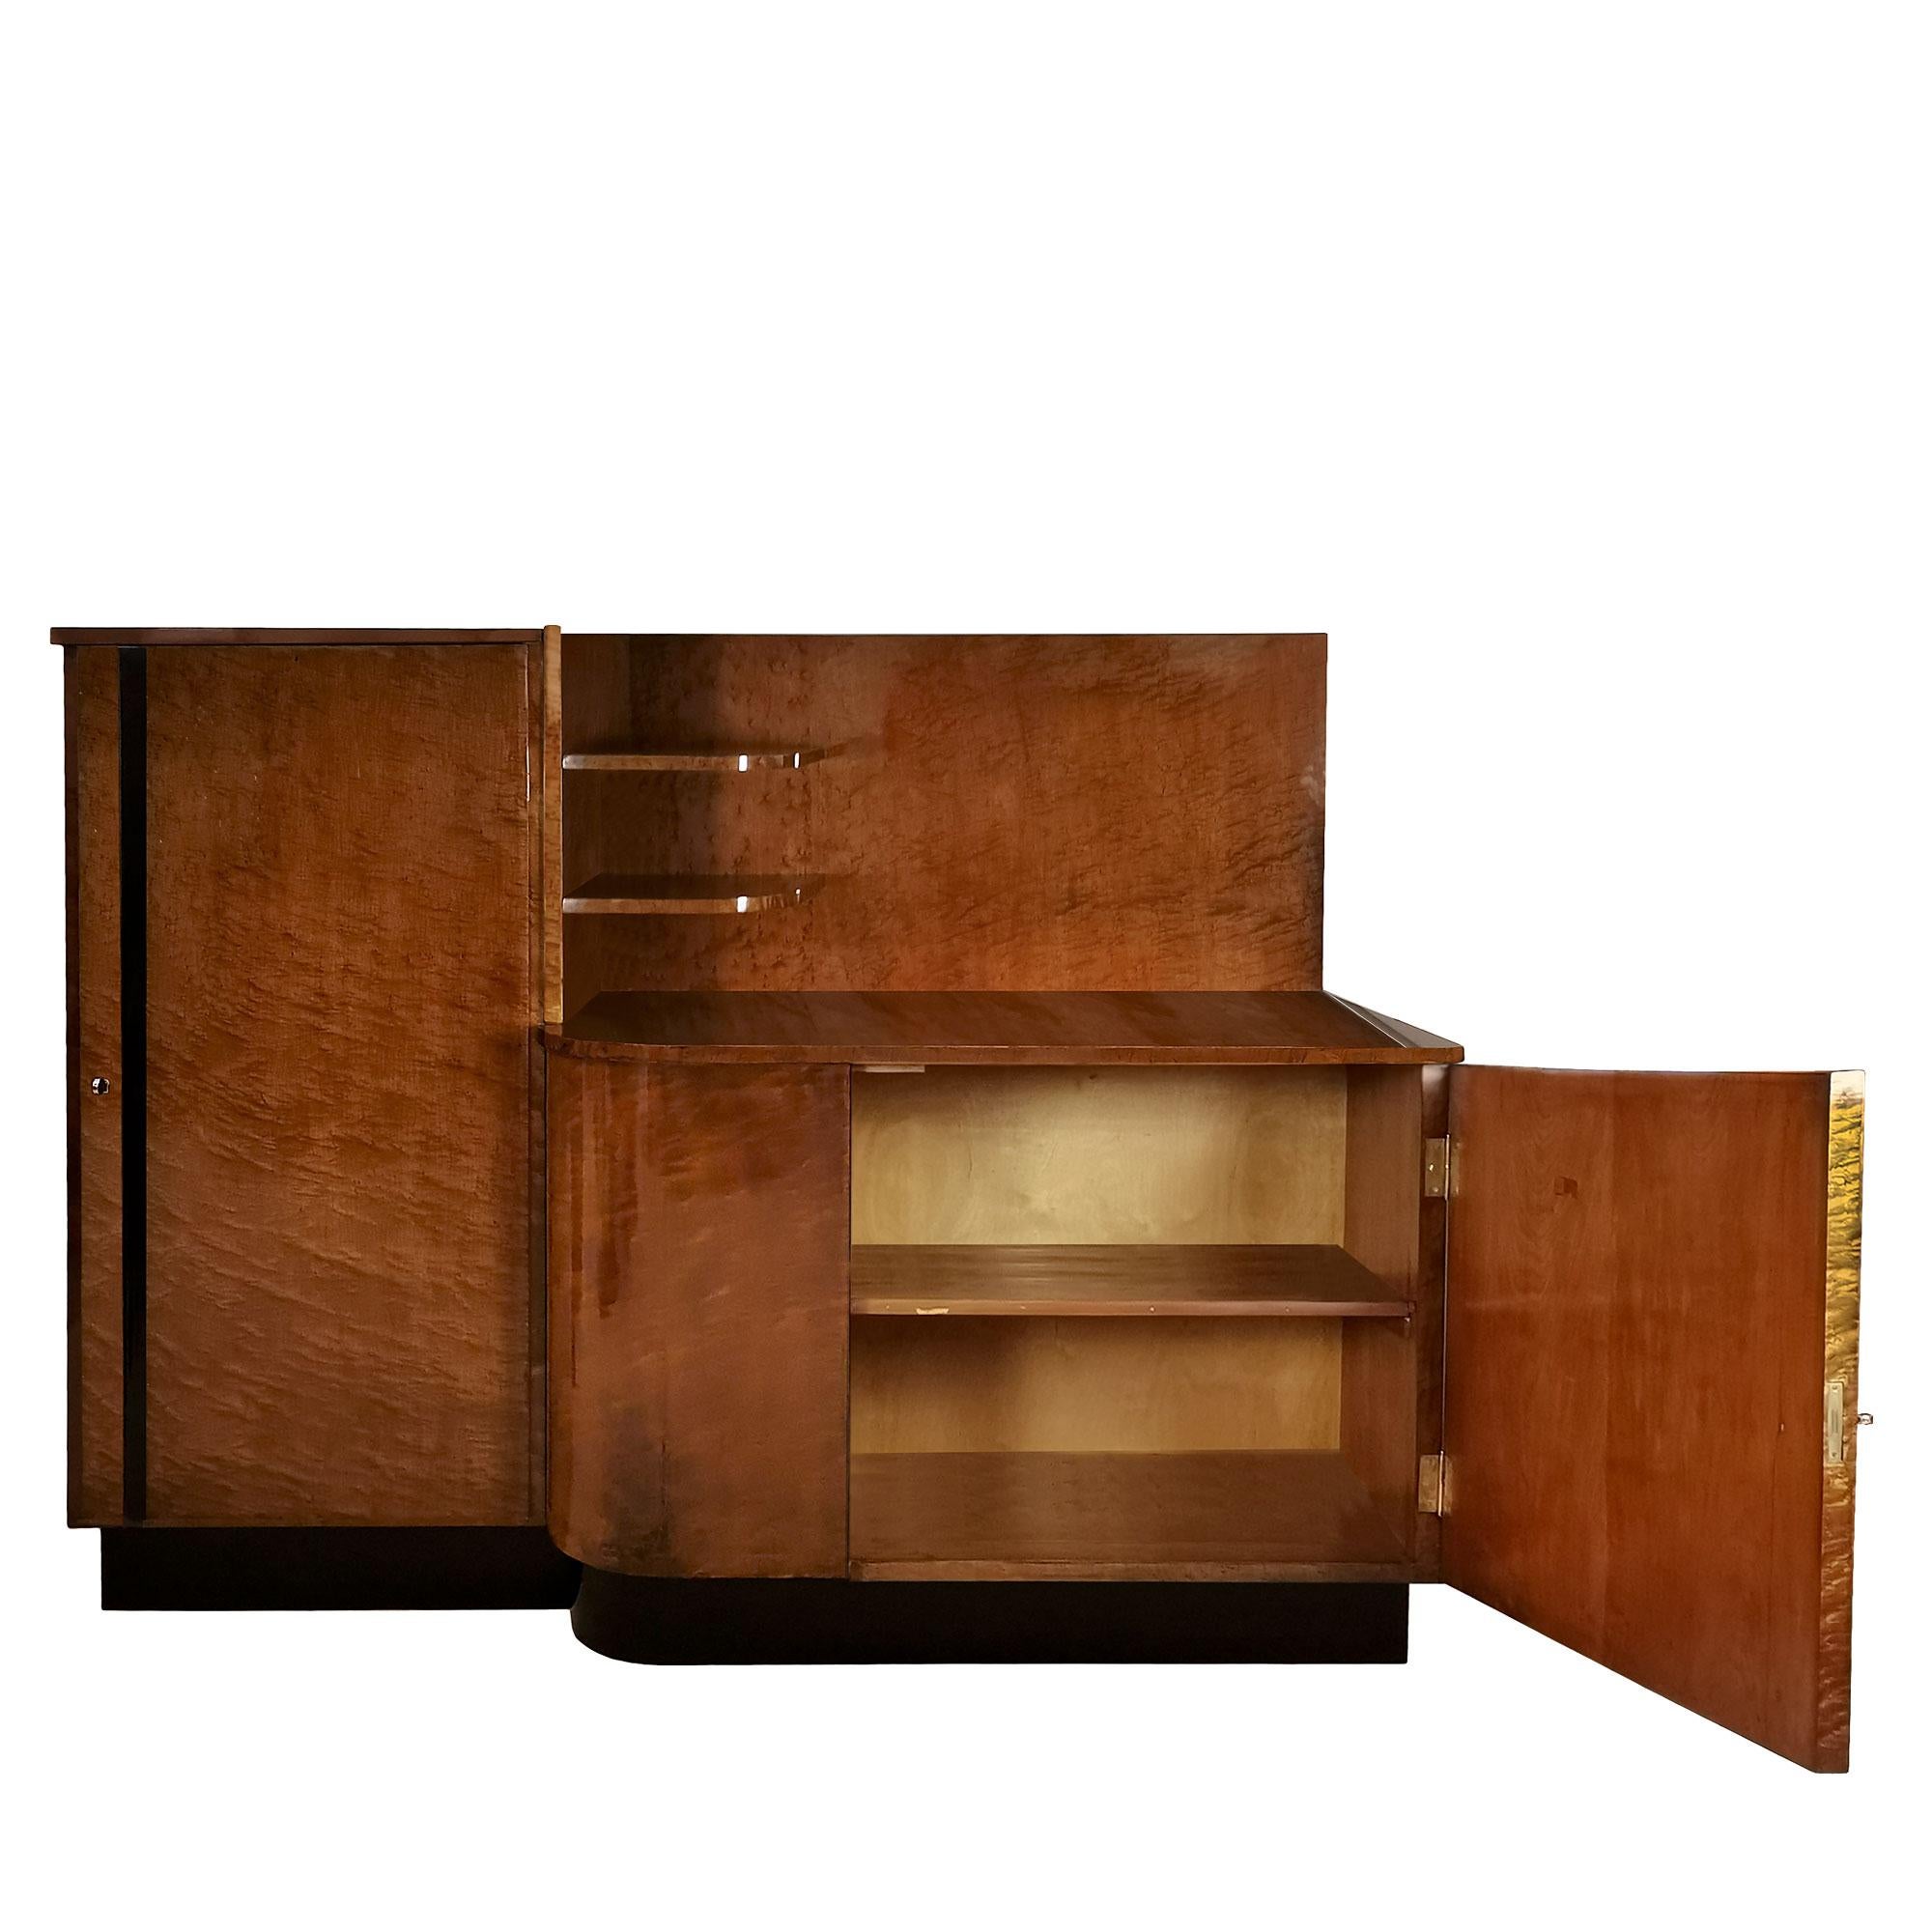 Large Art Deco Sideboard Cabinet in Speckled Mahogany - Italy 1930 In Good Condition For Sale In Girona, ES